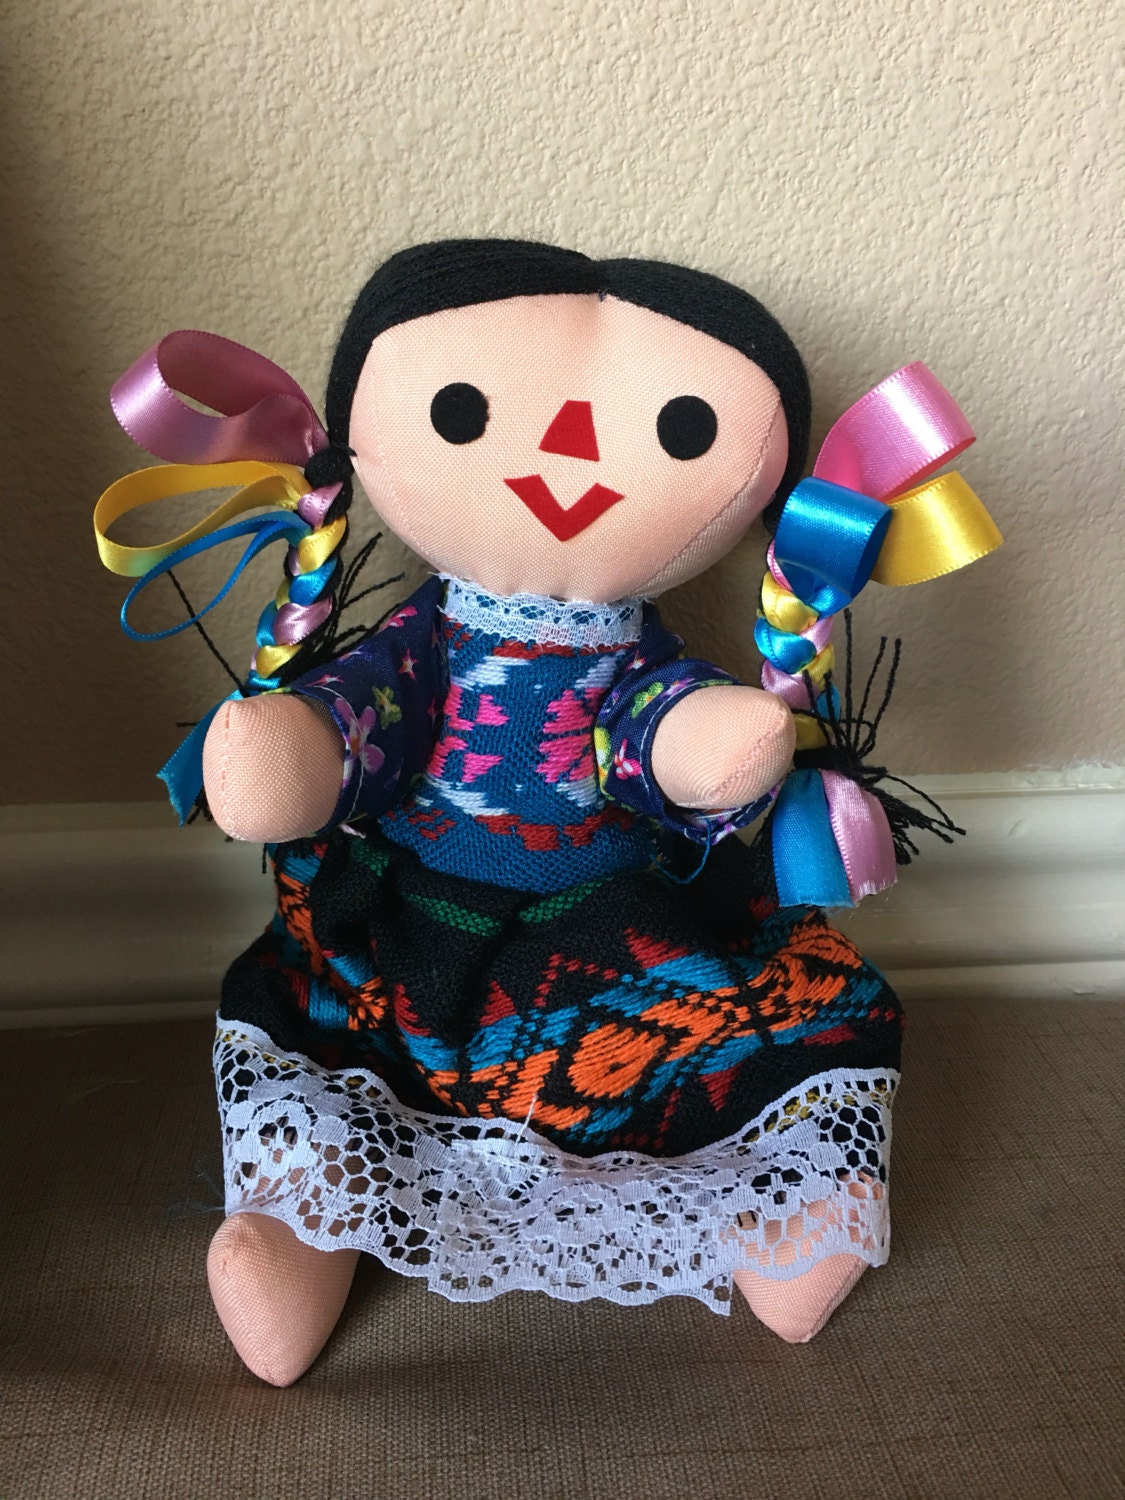 Authentic Handmade Mexican Dolls by LoveSofiaShop on Etsy